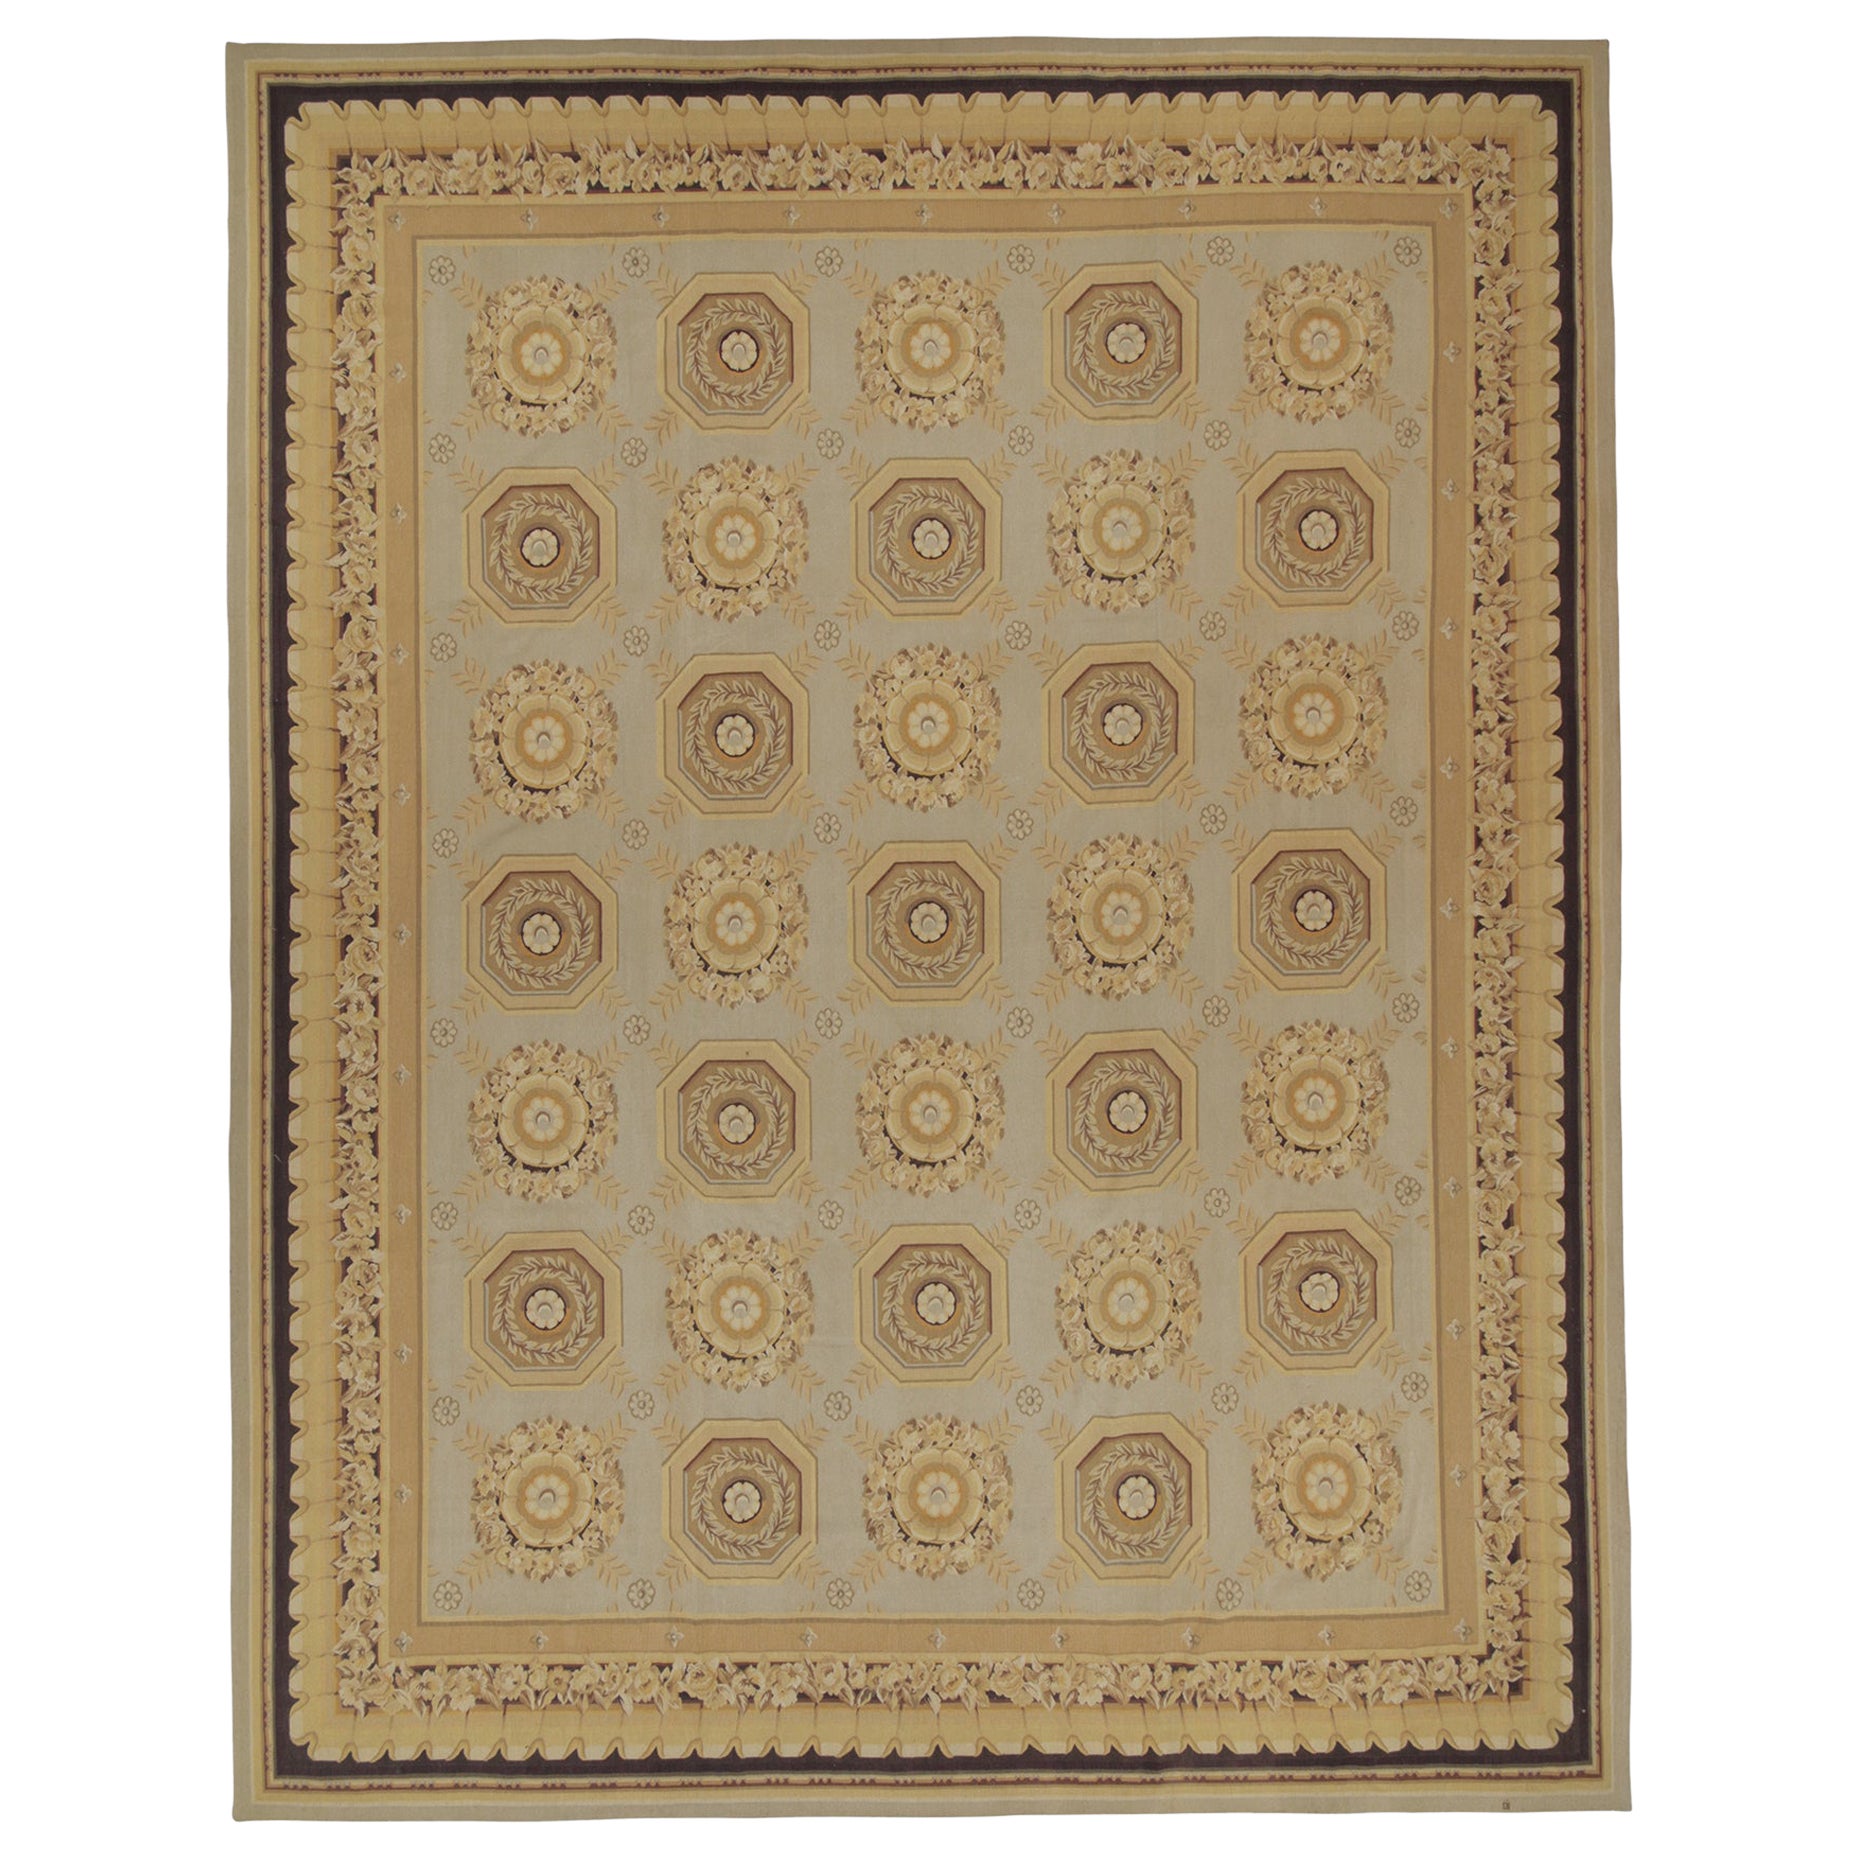 Rug & Kilim’s Aubusson Style Flat Weave in Gray, Beige and Gold Floral Pattern